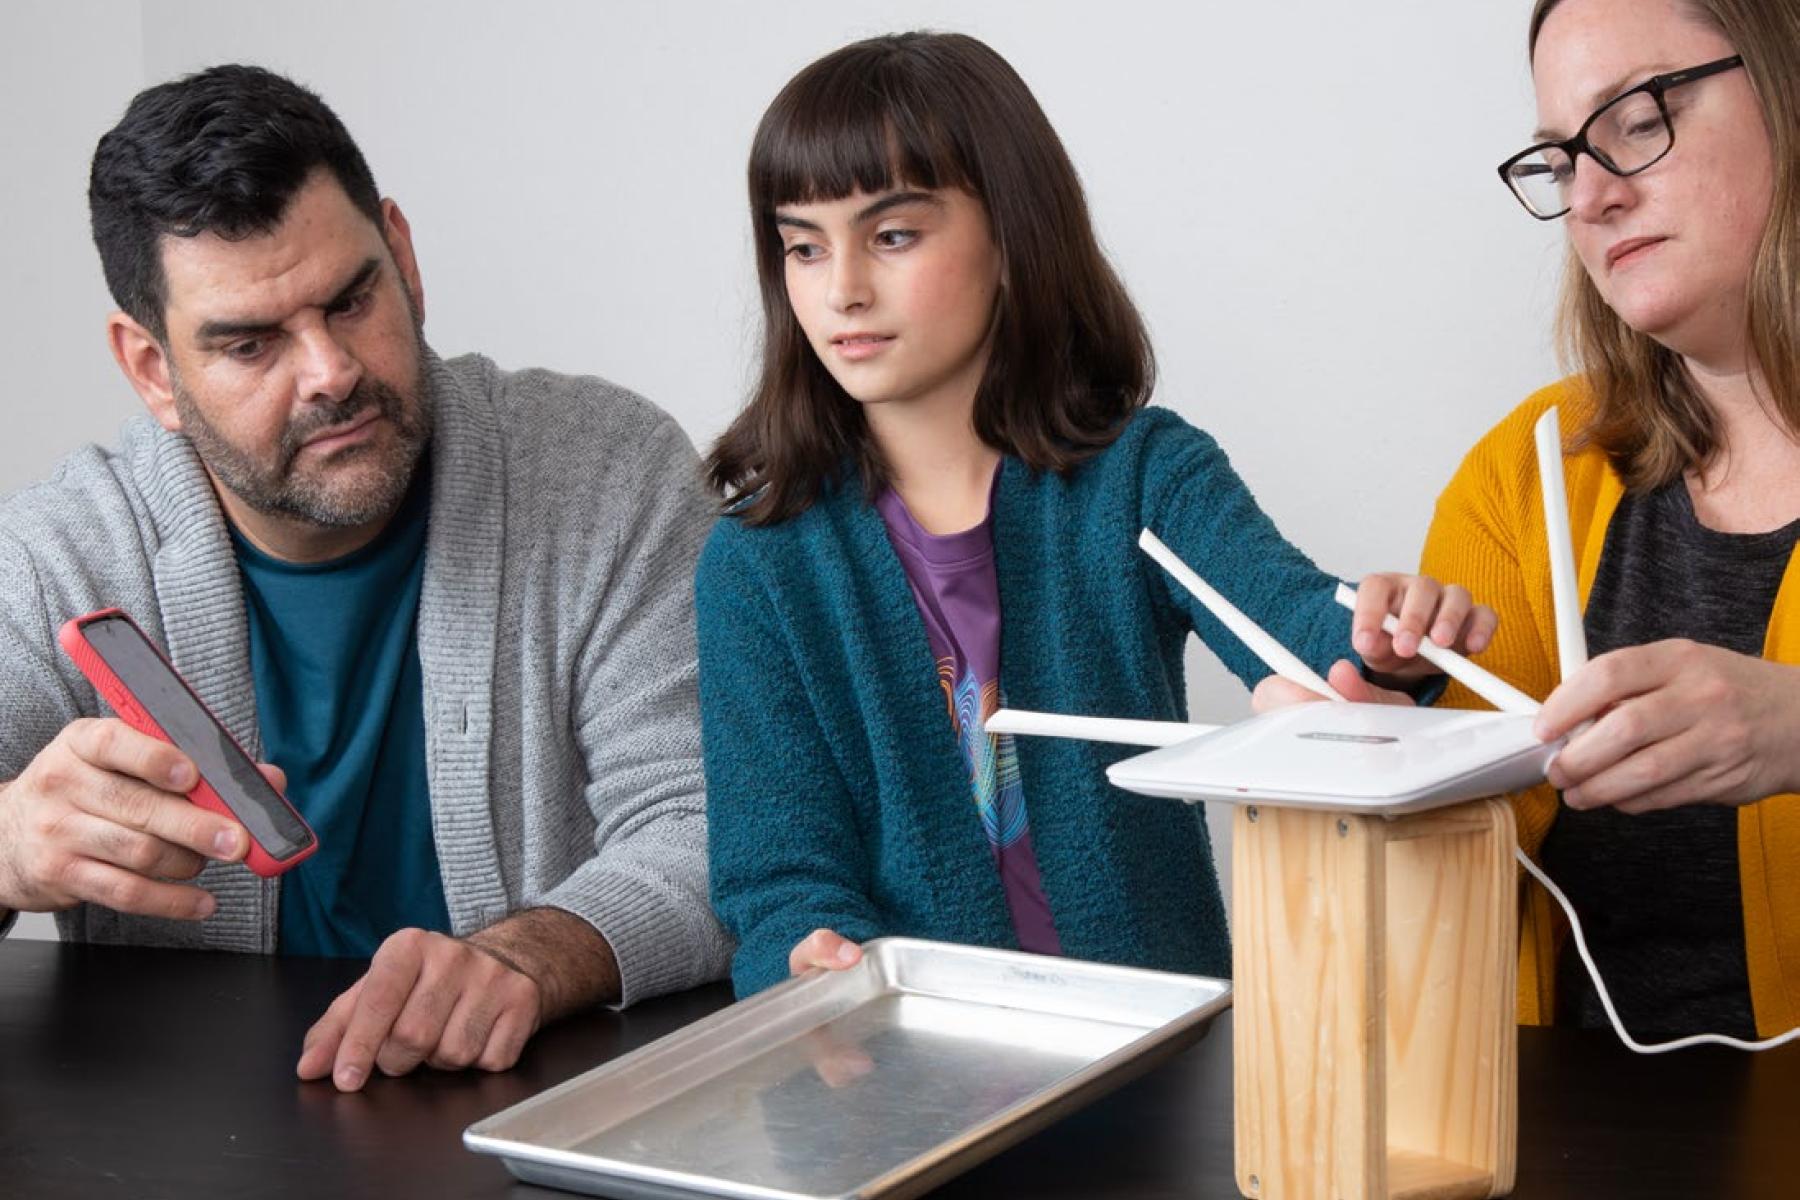 A child holds a metal baking sheet flat on a table in between two adults. The adult on the left holds a smartphone and the adult on the right is adjust the antennae of a Wi-Fi router on a block of wood.